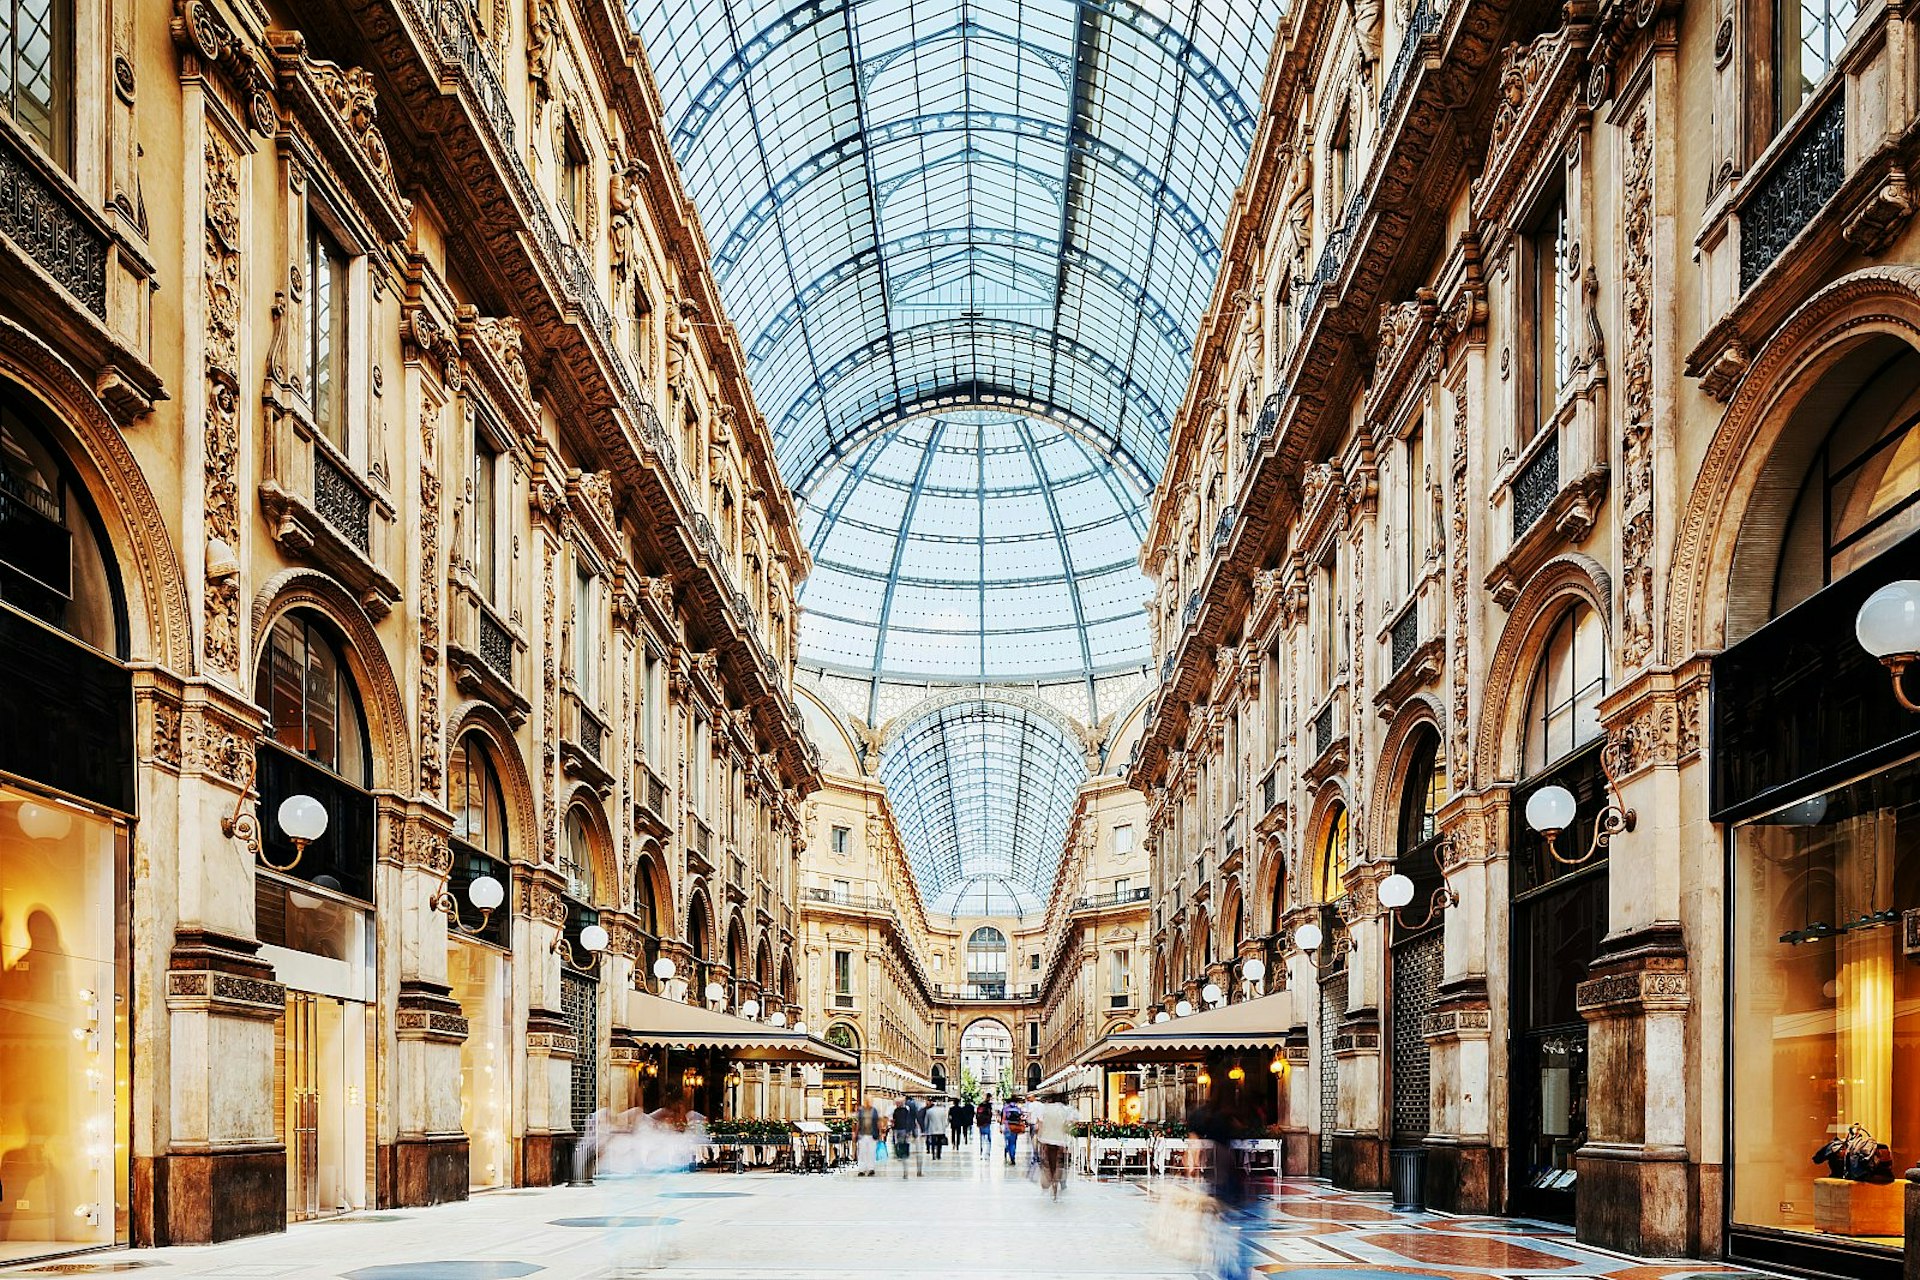 Inside the neoclassical Galleria Vittorio Emanuele II shopping arcade, looking up to its roof made of iron and glass, with upmarket stores either side of the arcade.